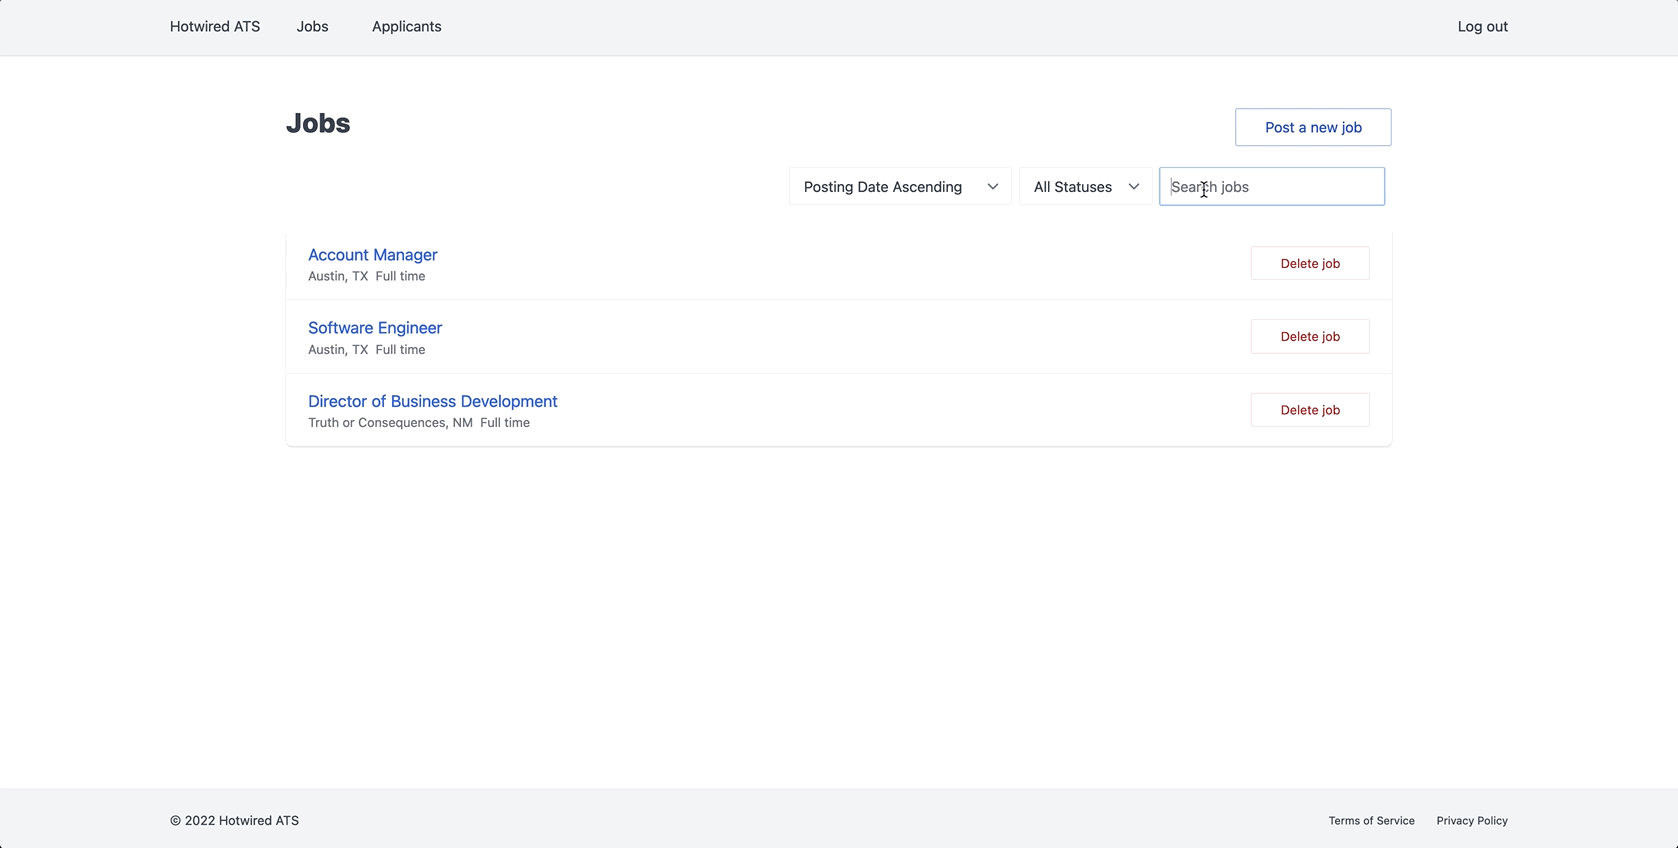 A gif of a user interacting with a filter form above a list of jobs. As they change the filter options, the list of jobs updates automatically.